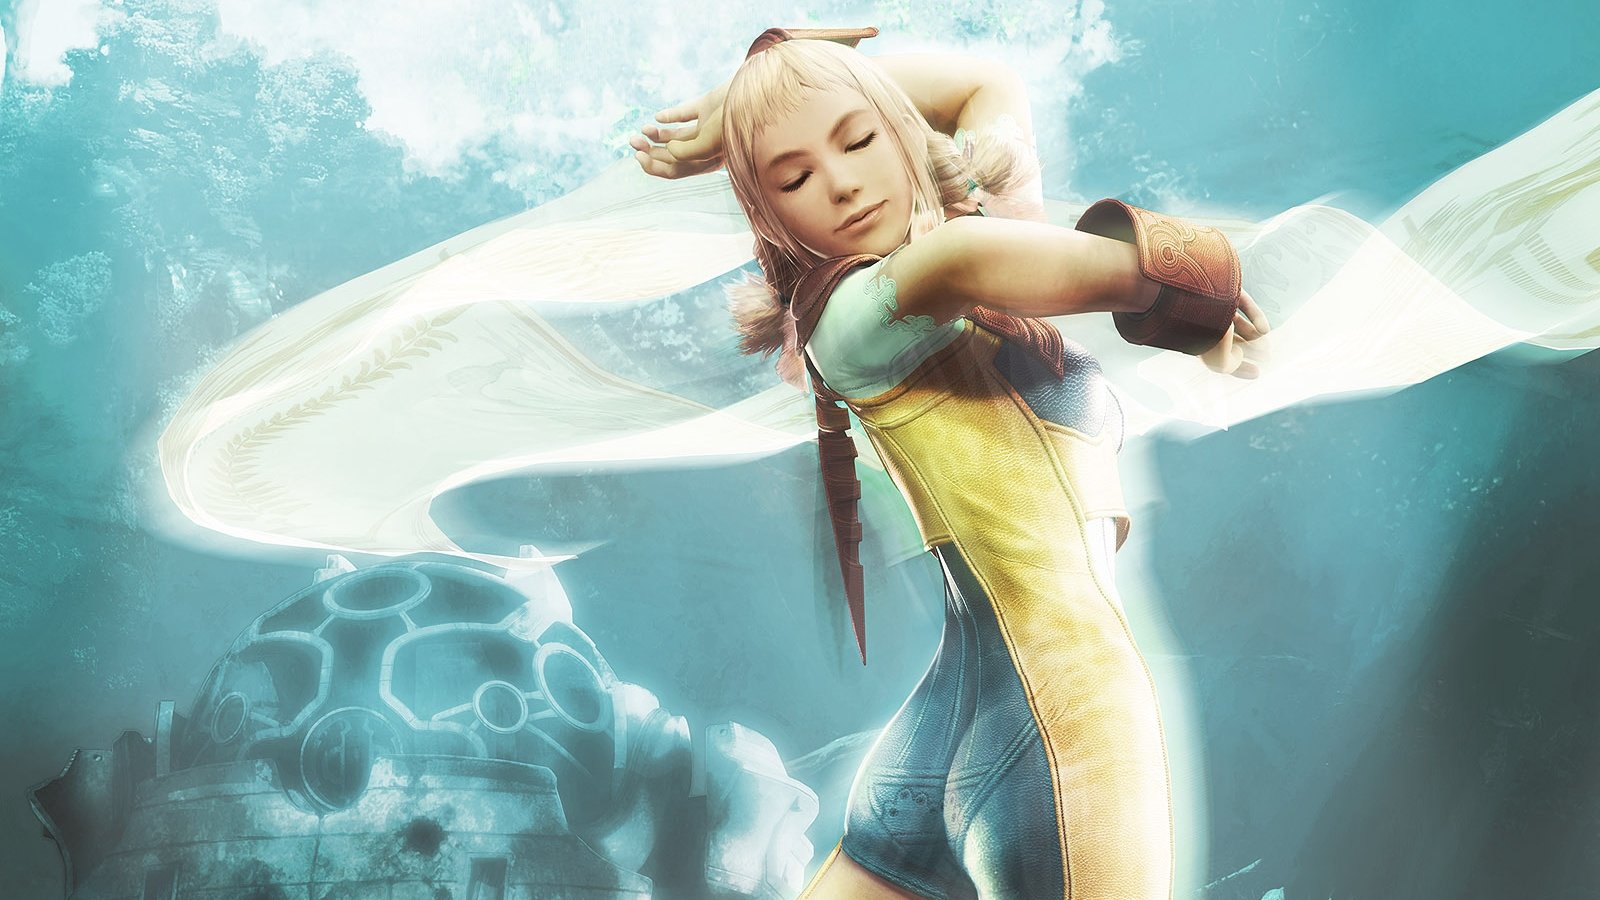 Awesome Final Fantasy Xii Free Wallpaper Id - Penelo And Vaan Ff Revenant Wings - HD Wallpaper 